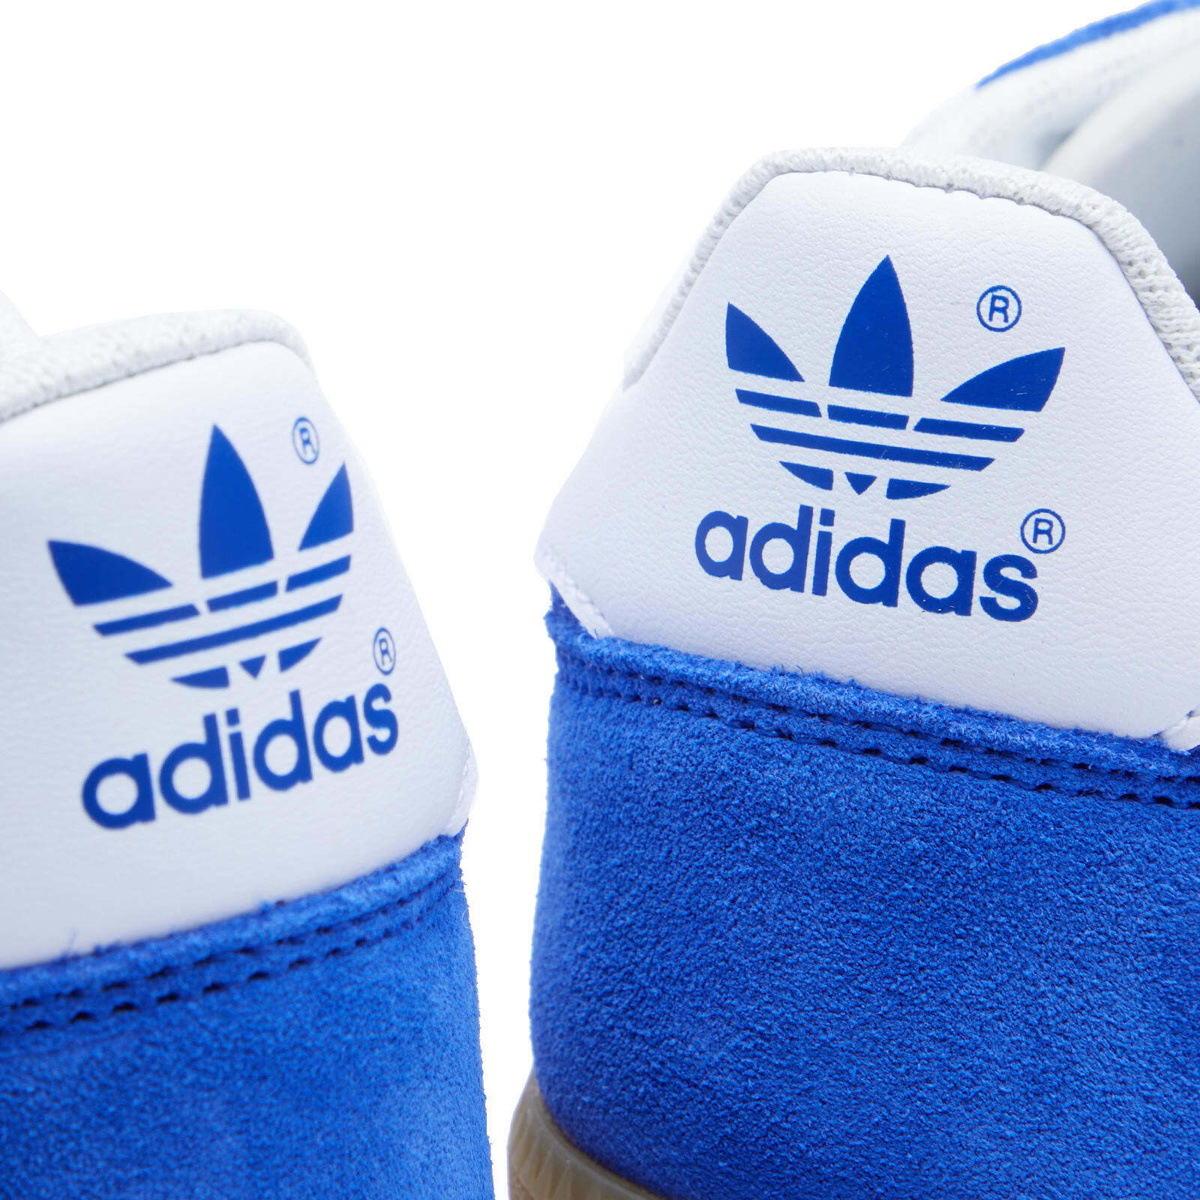 Adidas Hand 2 Sneakers in Semi Blue/White Lucid adidas